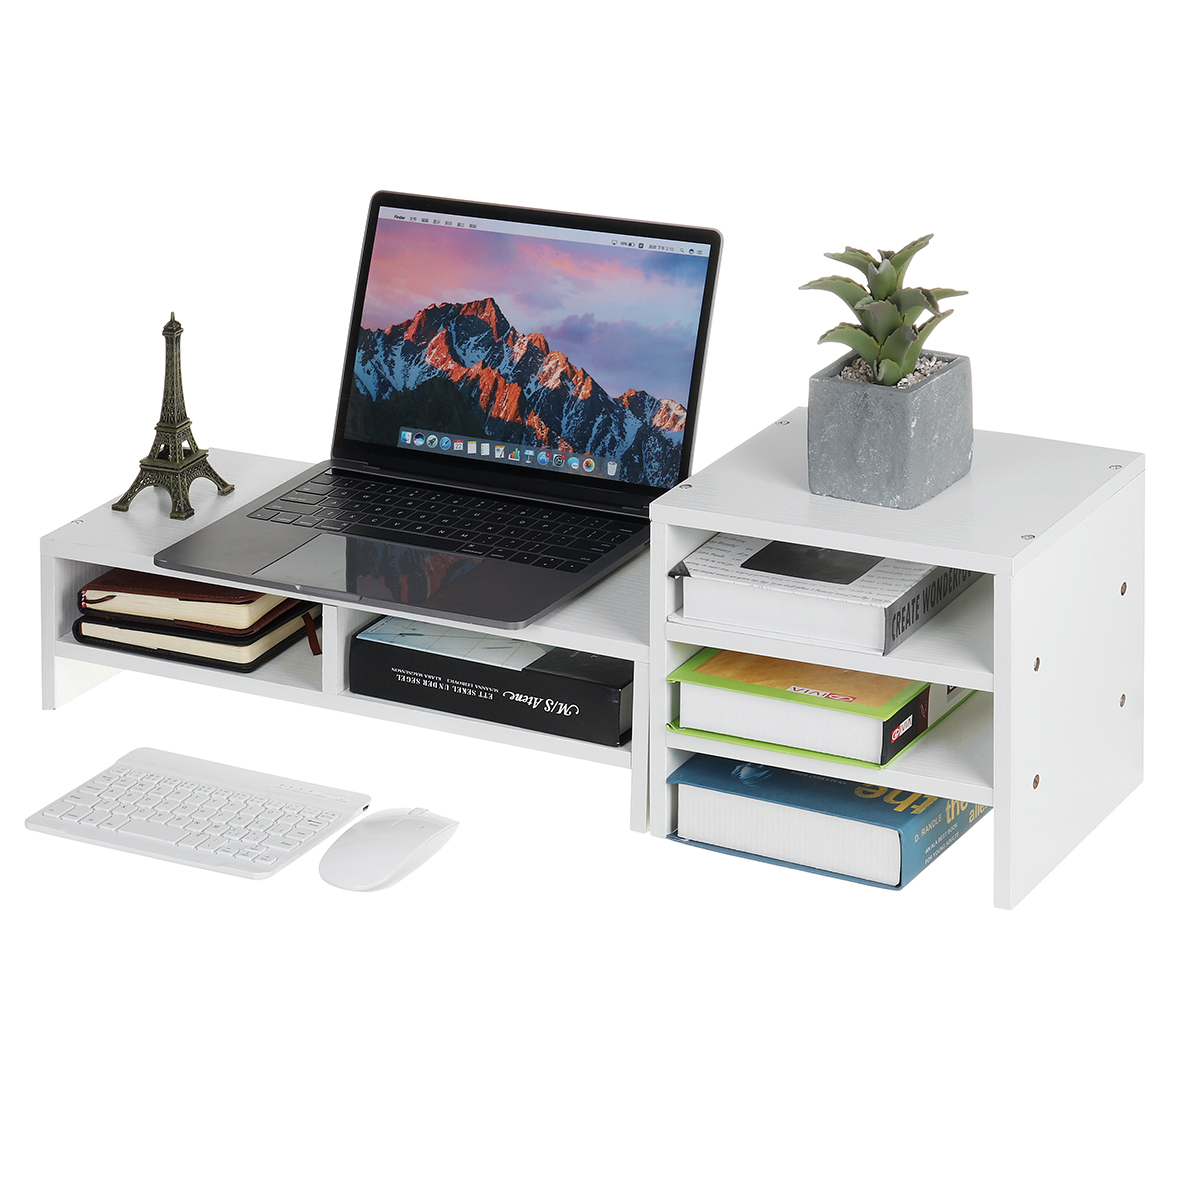 Computer-Monitor-Riser-Desktop-LED-LCD-Laptop-Monitor-Support-Stand-Desktop-Organizer-with-Storage-R-1794731-8